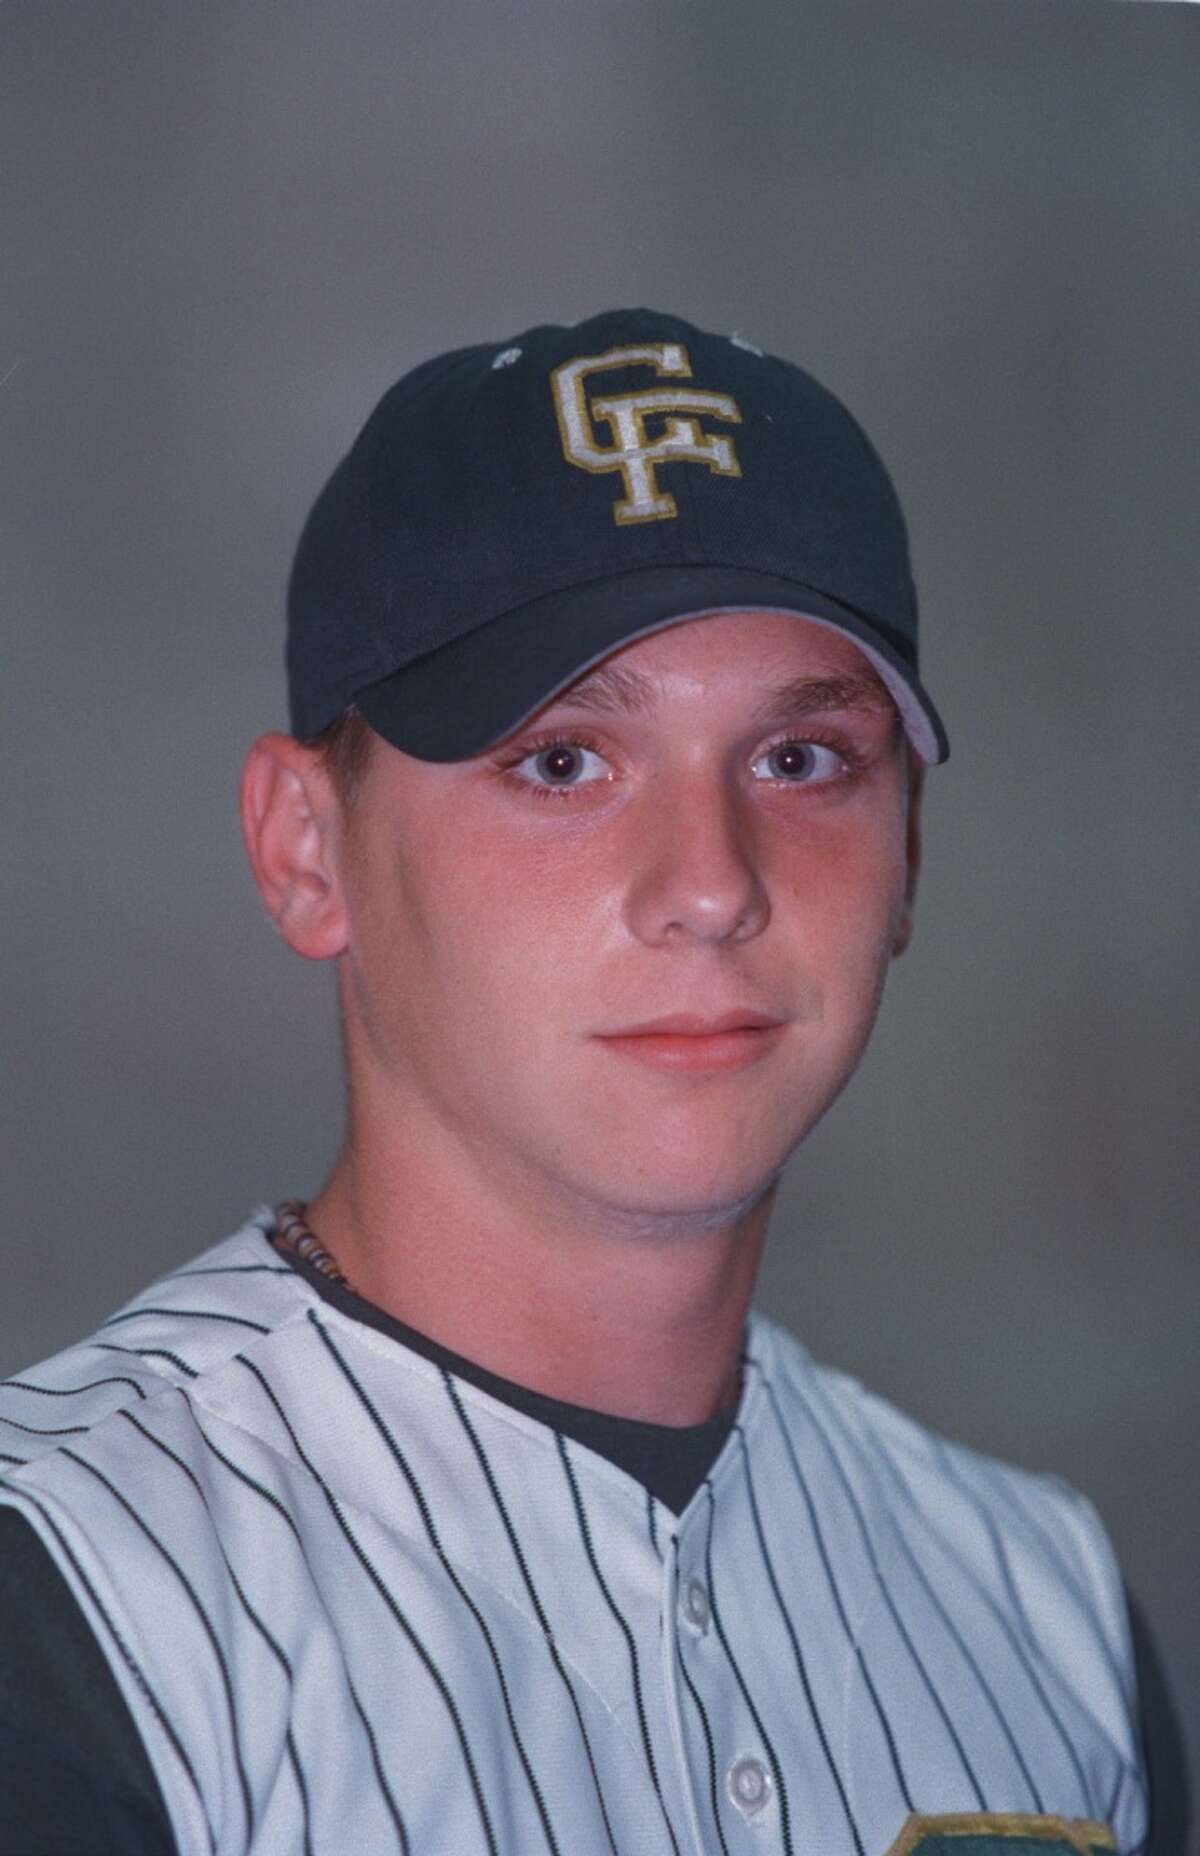 P - Scott Kazmir, Cy Falls posed in the track/ indoor practice facility at the University of Houston Tuesday June 5, 2001. HOUCHRON CAPTION (06/10/2001) (03/28/2002): Kazmir.